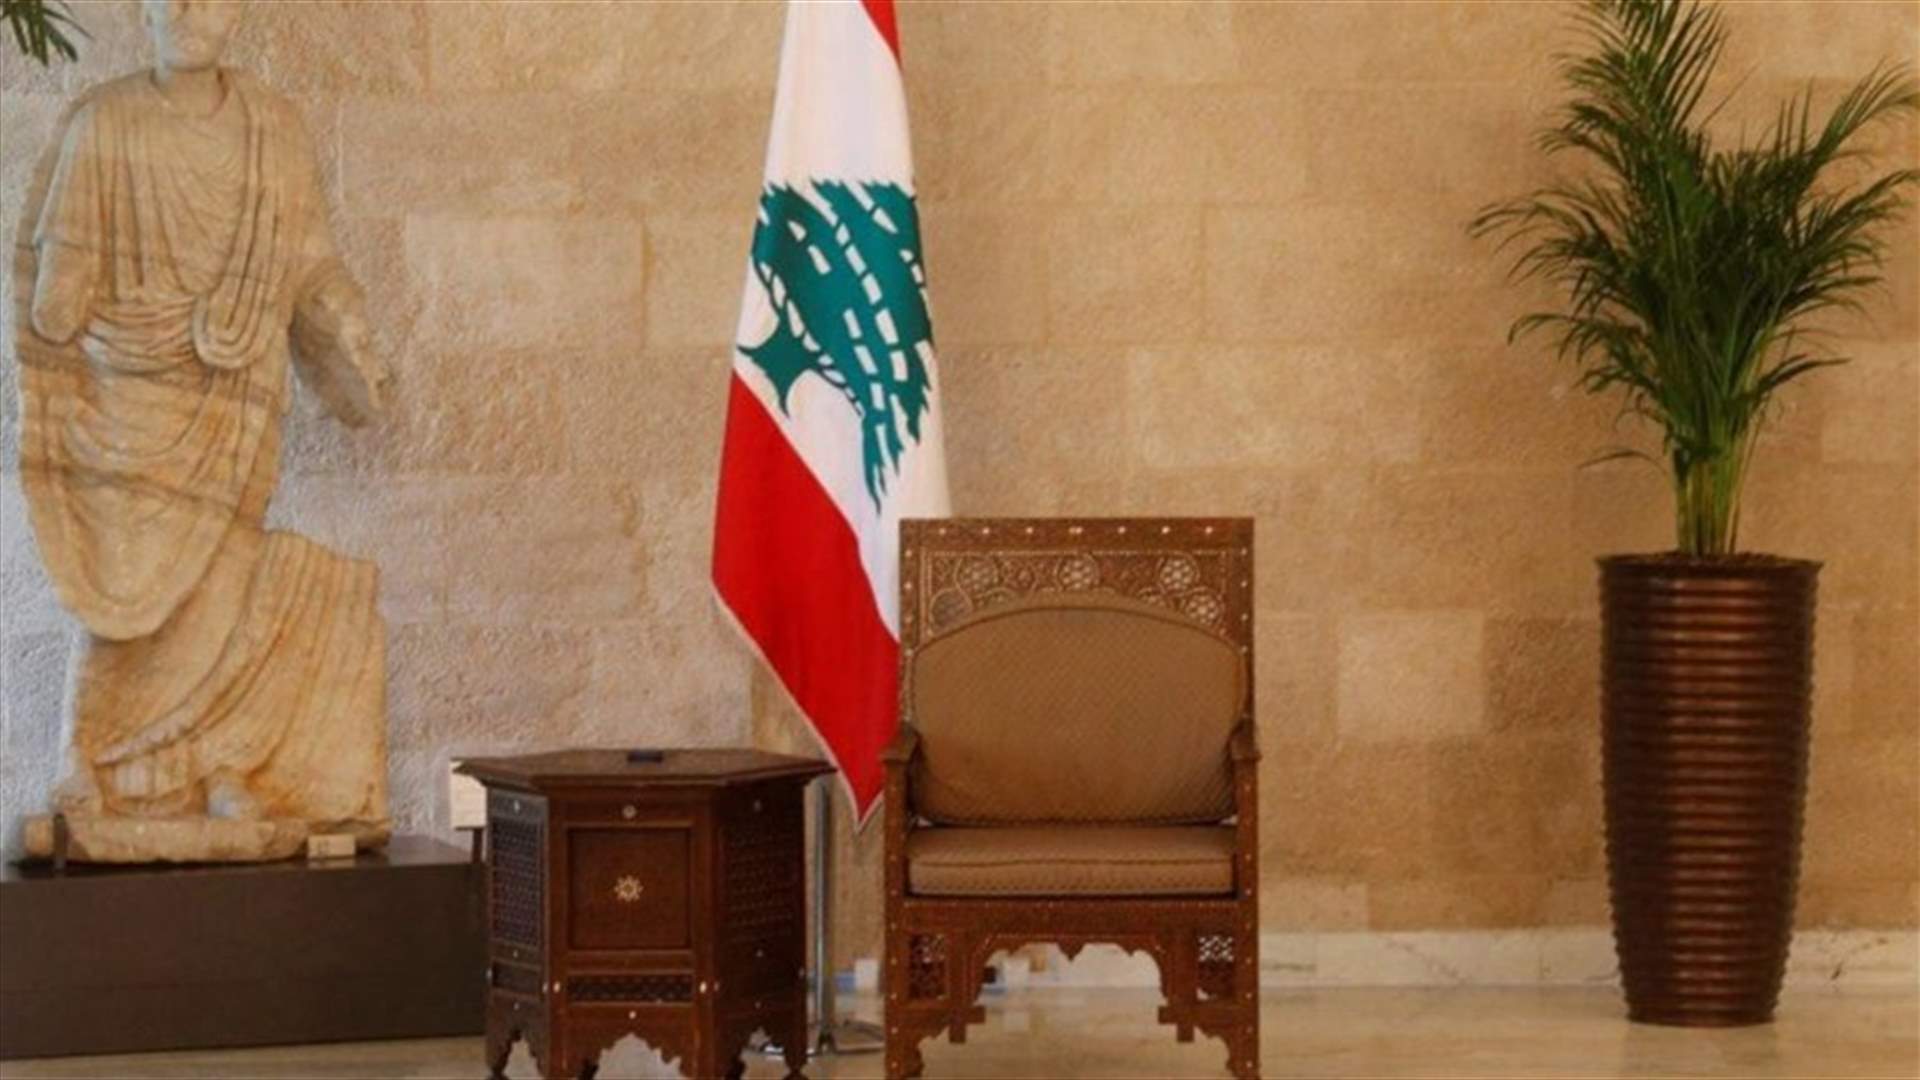 LACC appeals to the U.S. to help end Lebanon’s presidential vacuum